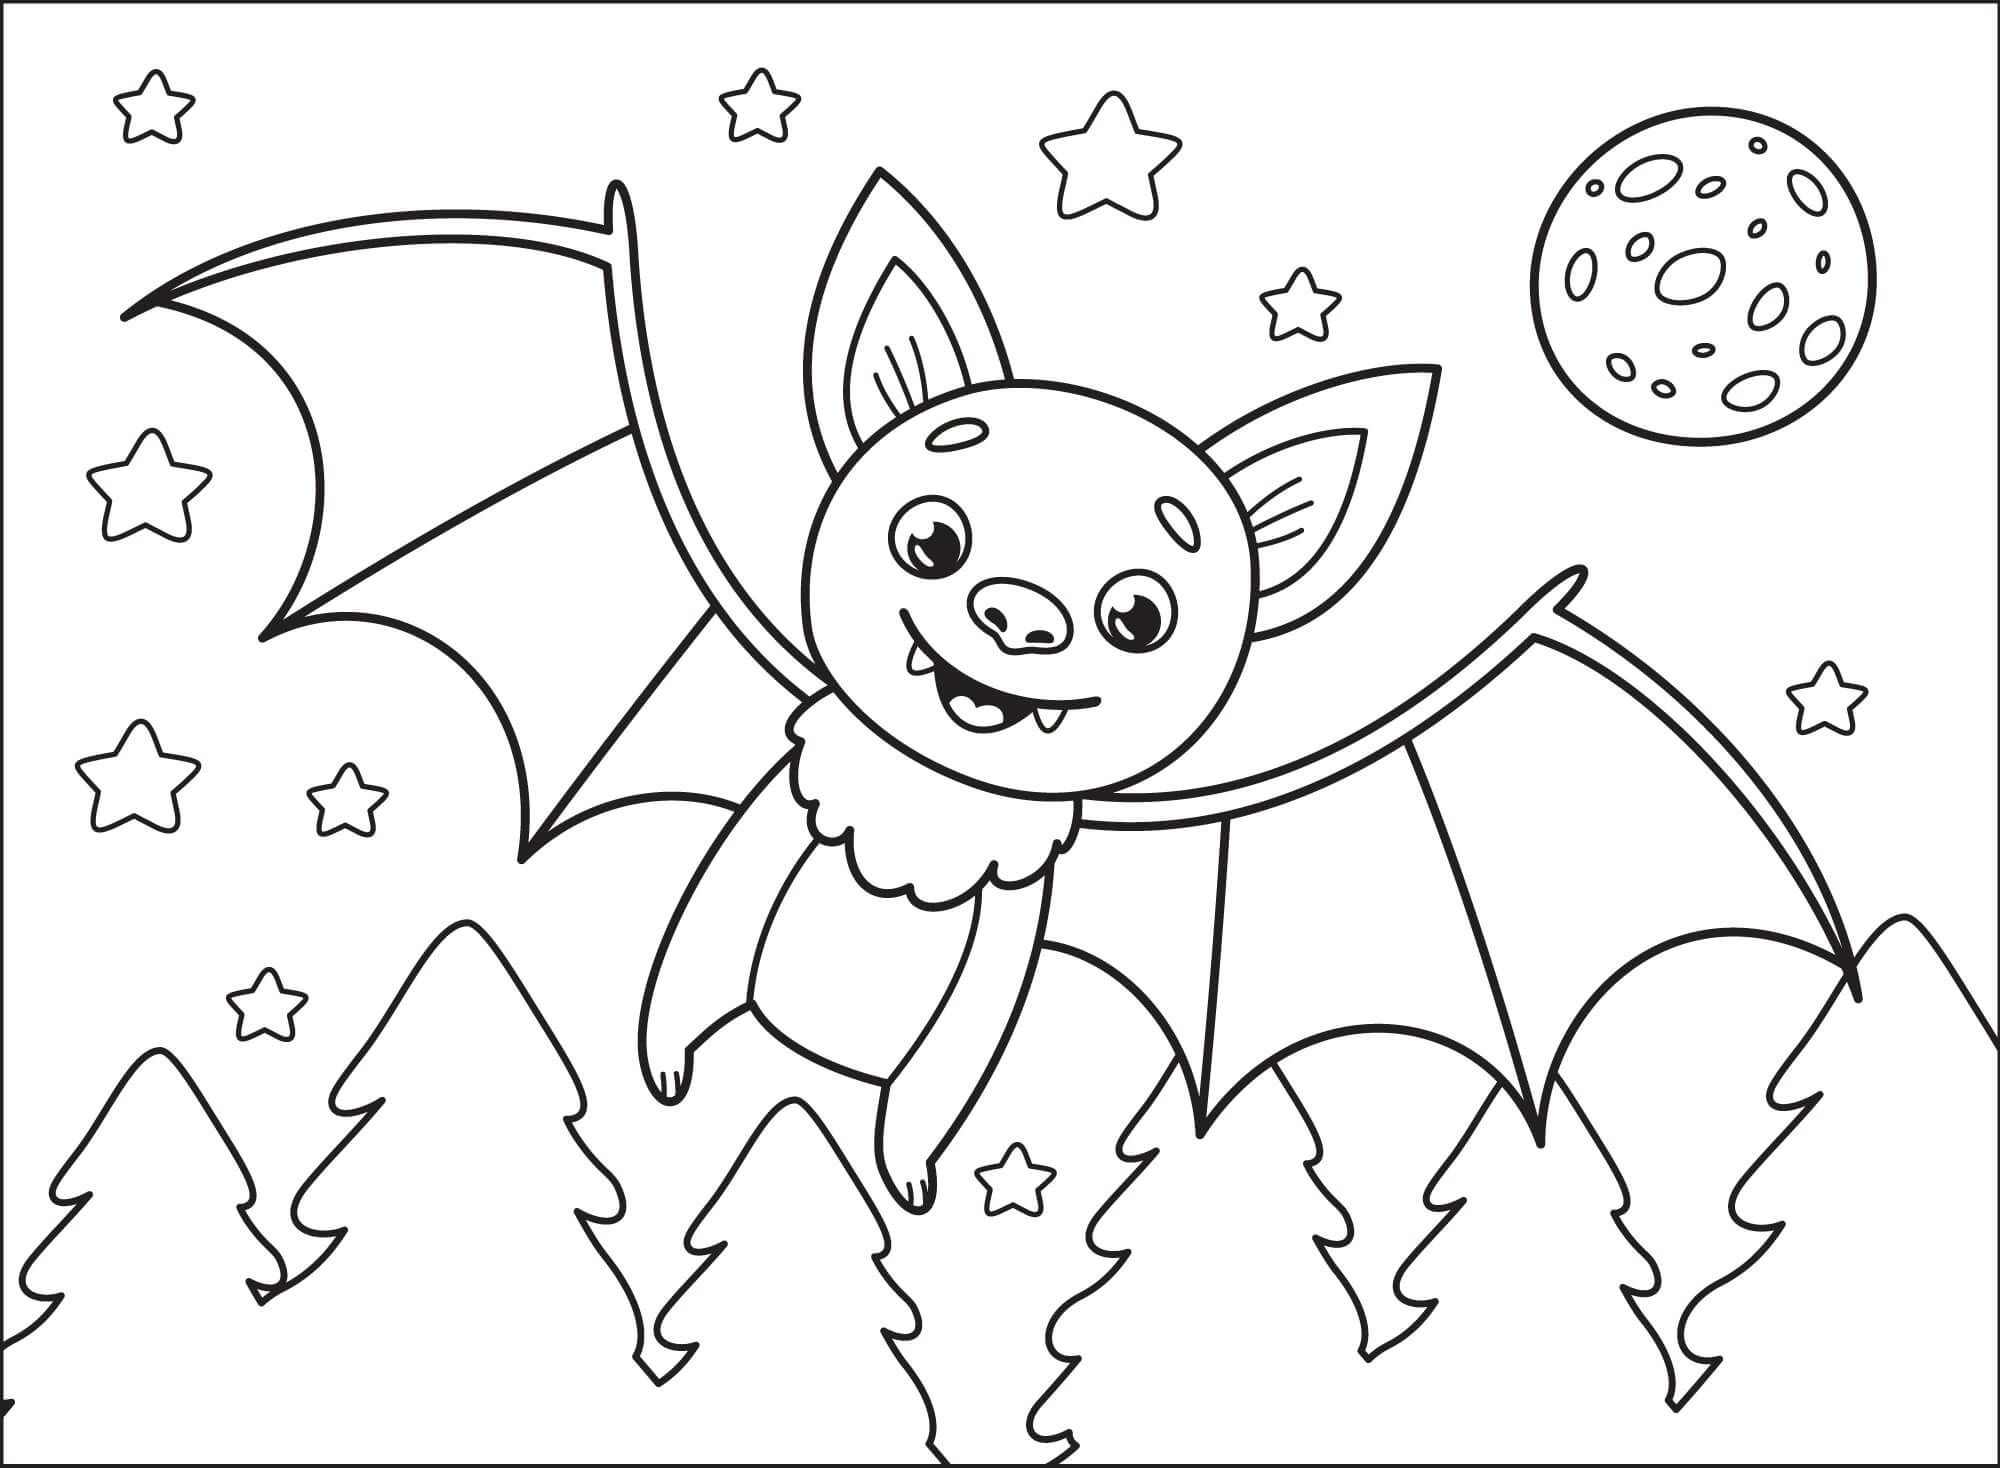 How To Draw Bat Coloring Page